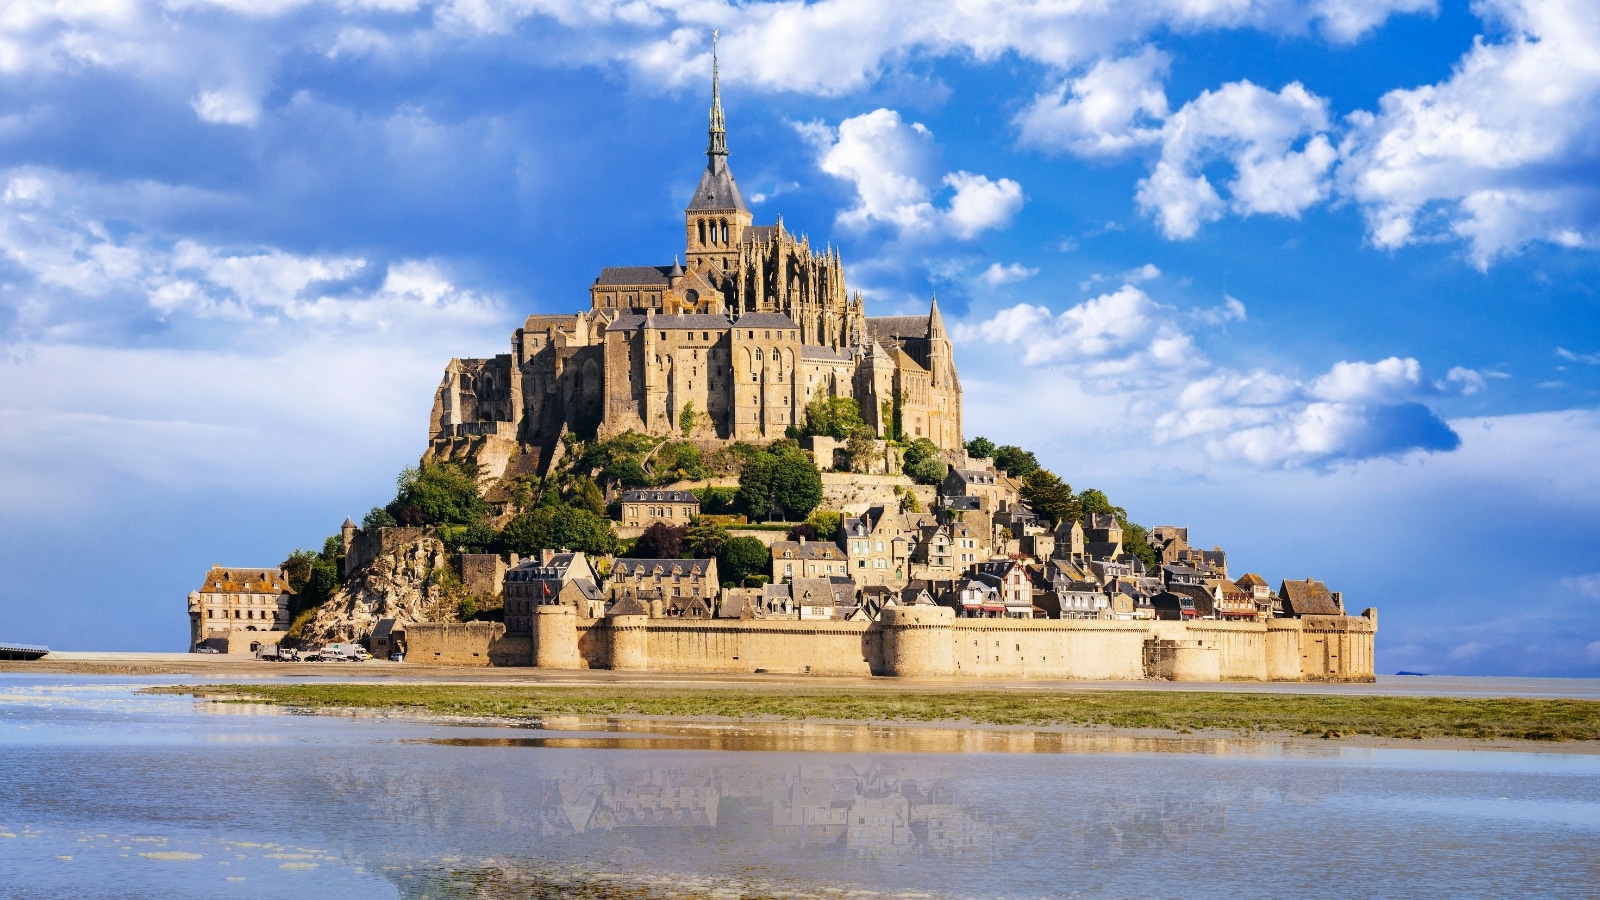 Mont Saint Michel photographed on a clear sunny day with white puffy clouds.